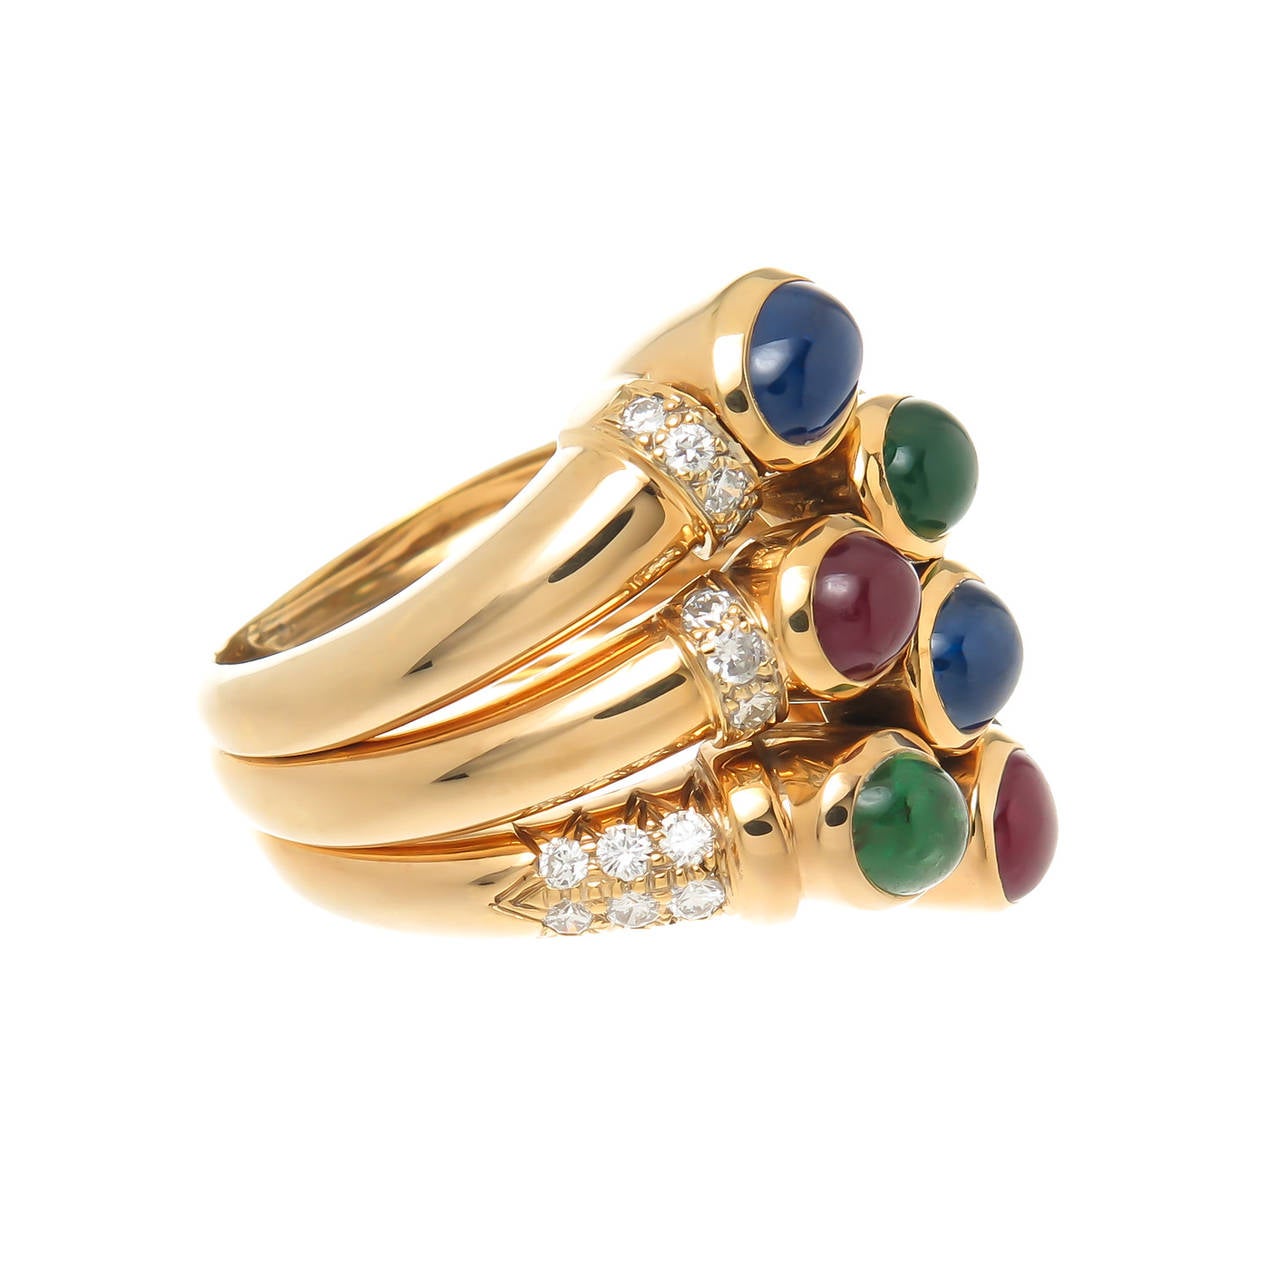 David Webb 18K Yellow gold ring, centrally set with Cabochon Rubies, Sapphires and Emeralds and further set with Round Brilliant cut Diamonds totaling approximately 1 carat. top measurements 1 inch in length x 1 inch wide.  Finger size = 5 1/2.